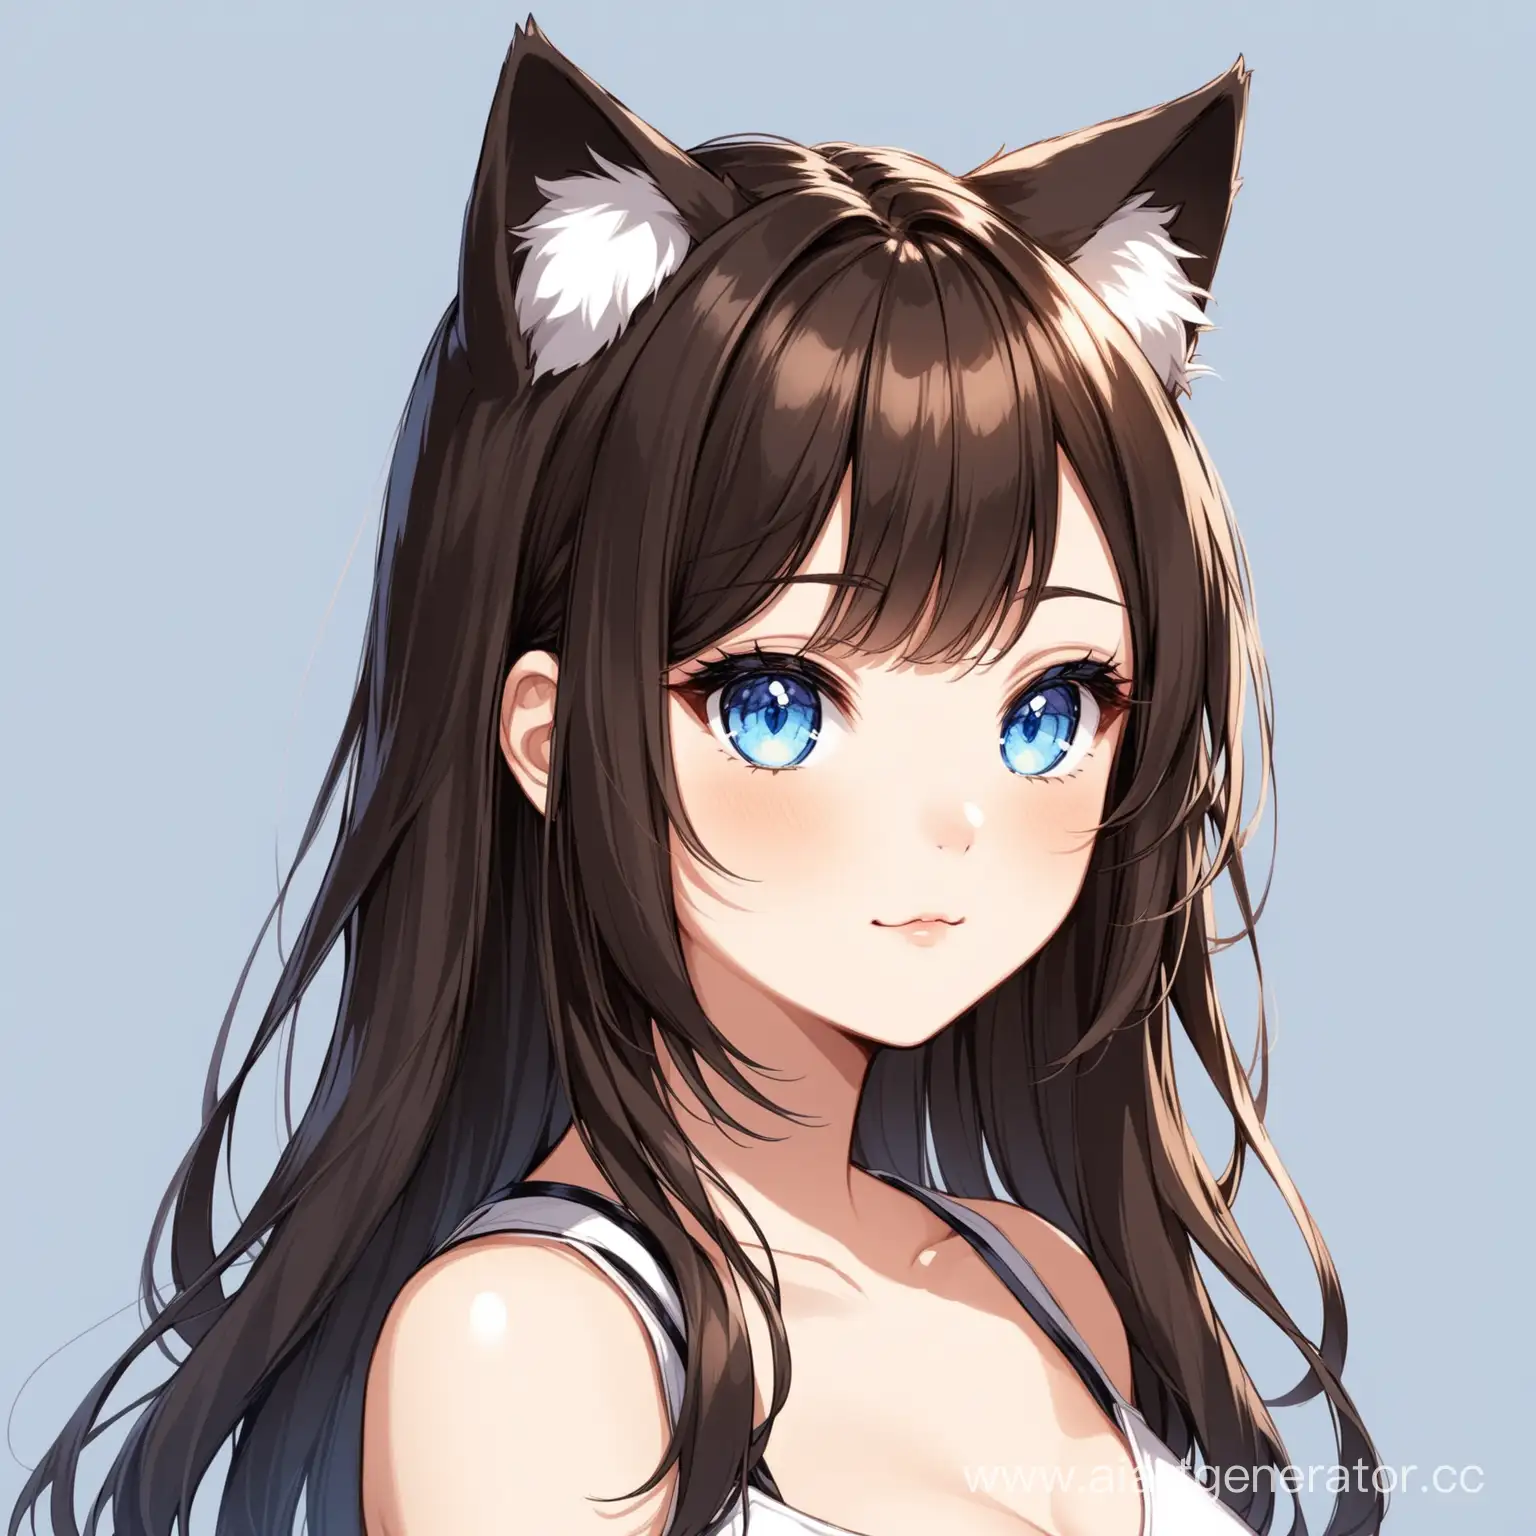 Brunette-with-Cat-Ears-and-Blue-Eyes-Avatar-Fantasy-Character-Illustration